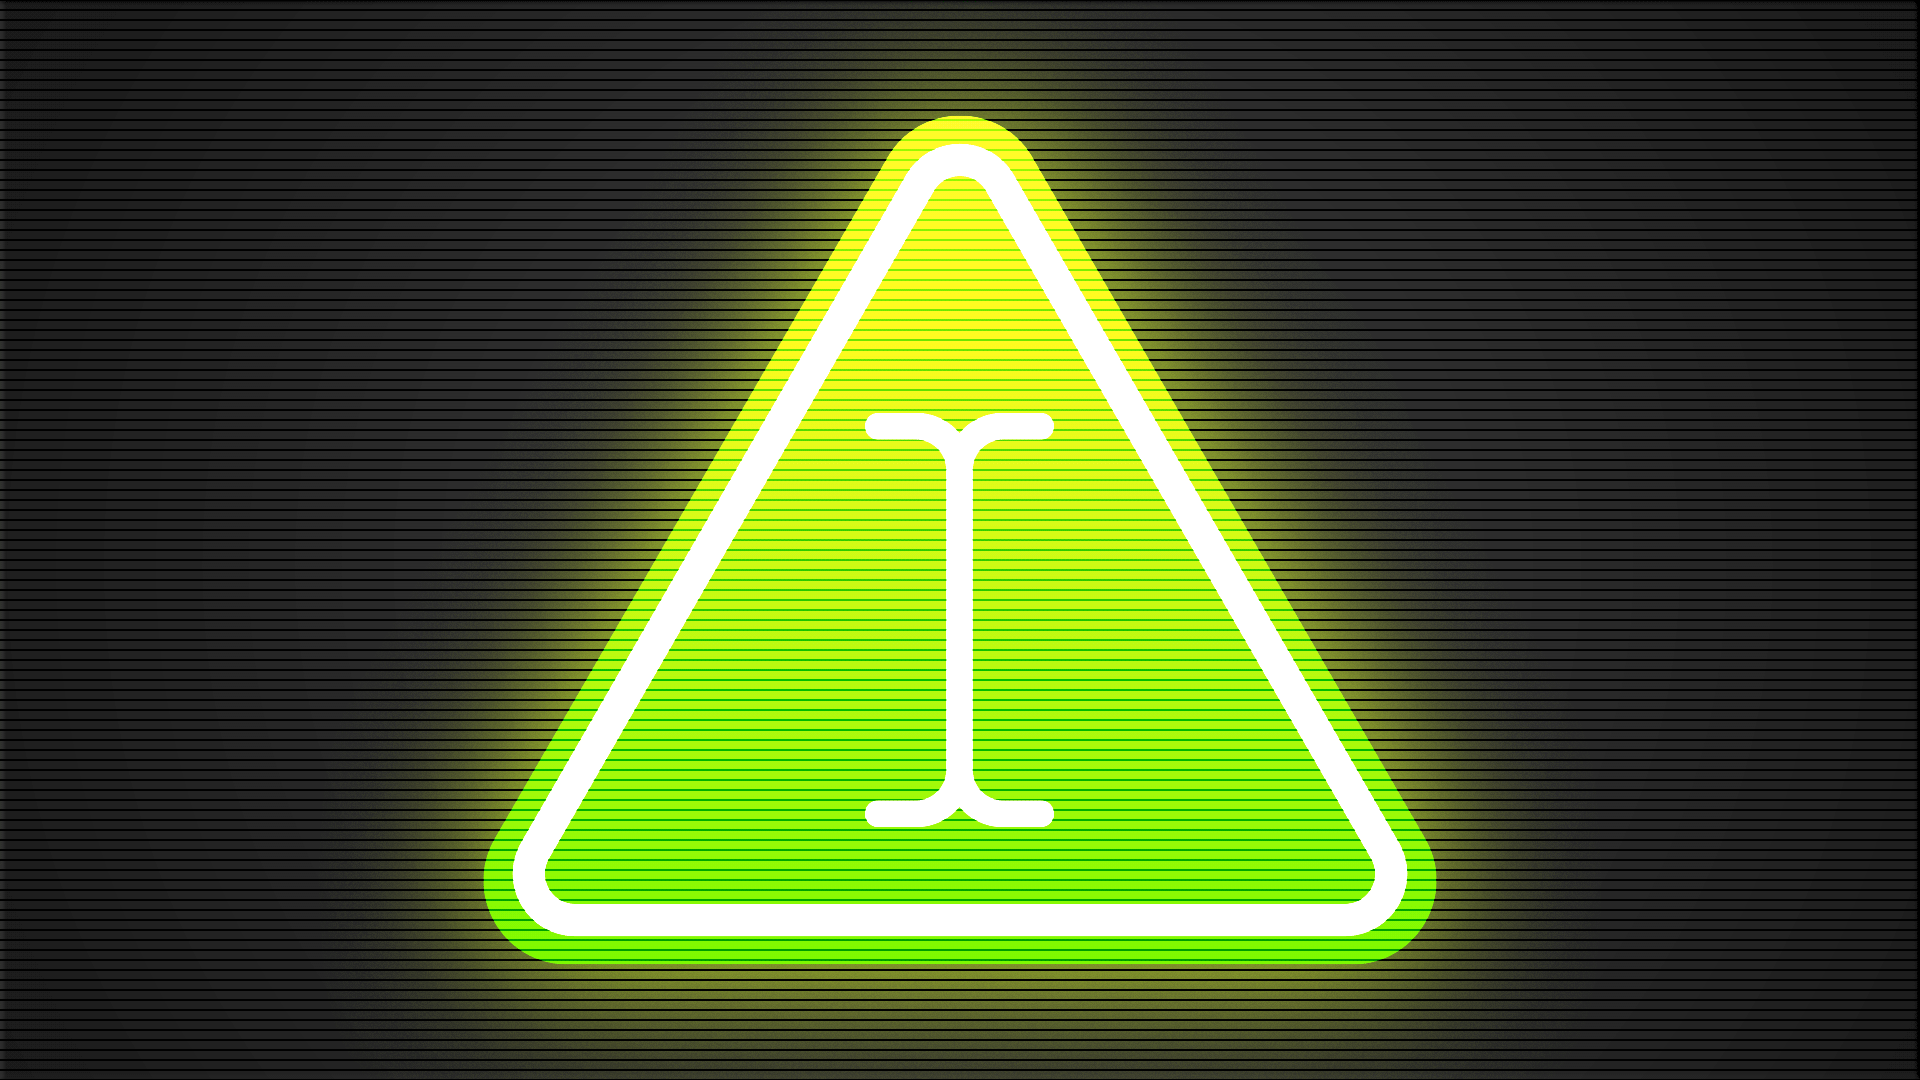 Animated illustration of a glowing green yield sign with a text cursor blinking in its center.